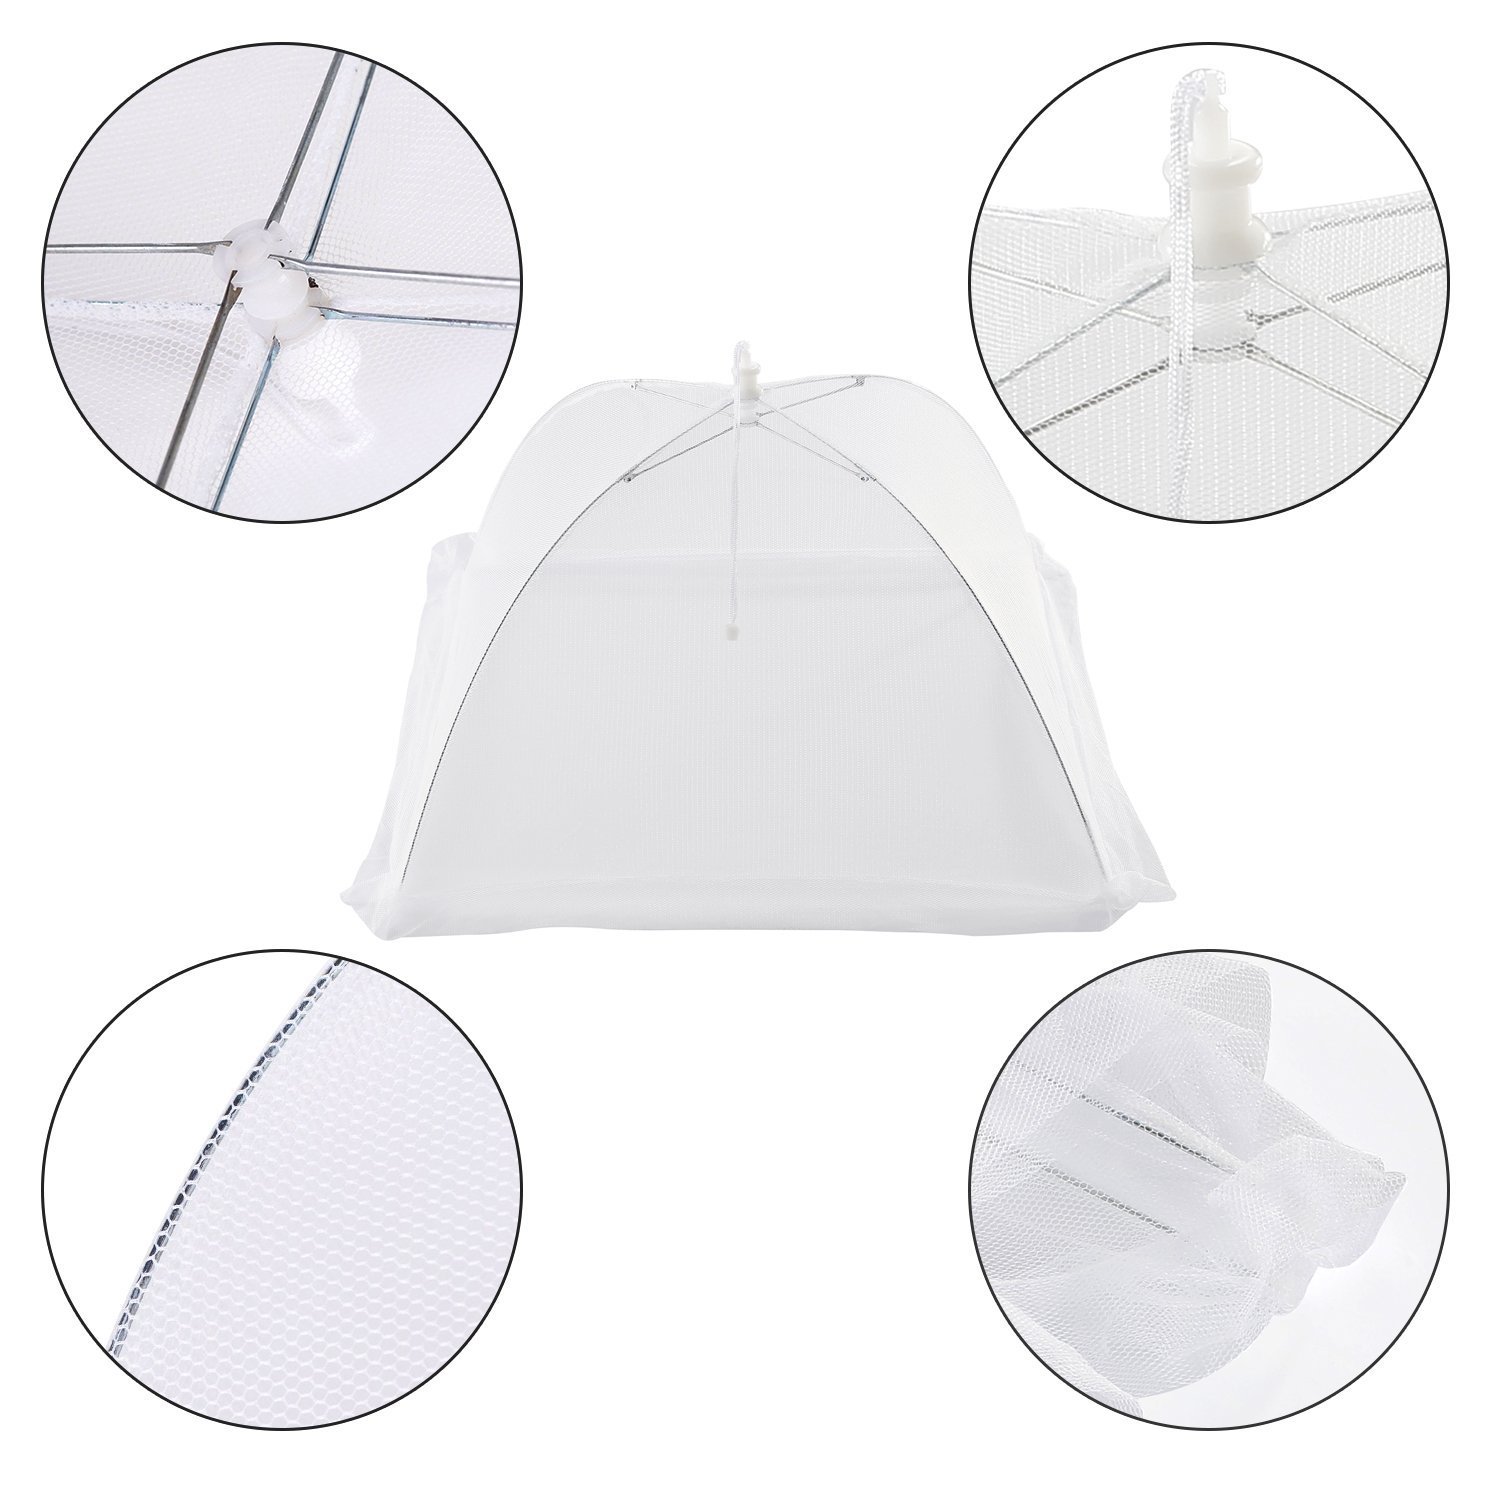 8 Packs Large Pop-Up Mesh Screen Food Cover Tents - Keep Out Flies, Bugs, Mosquitos - Reusable